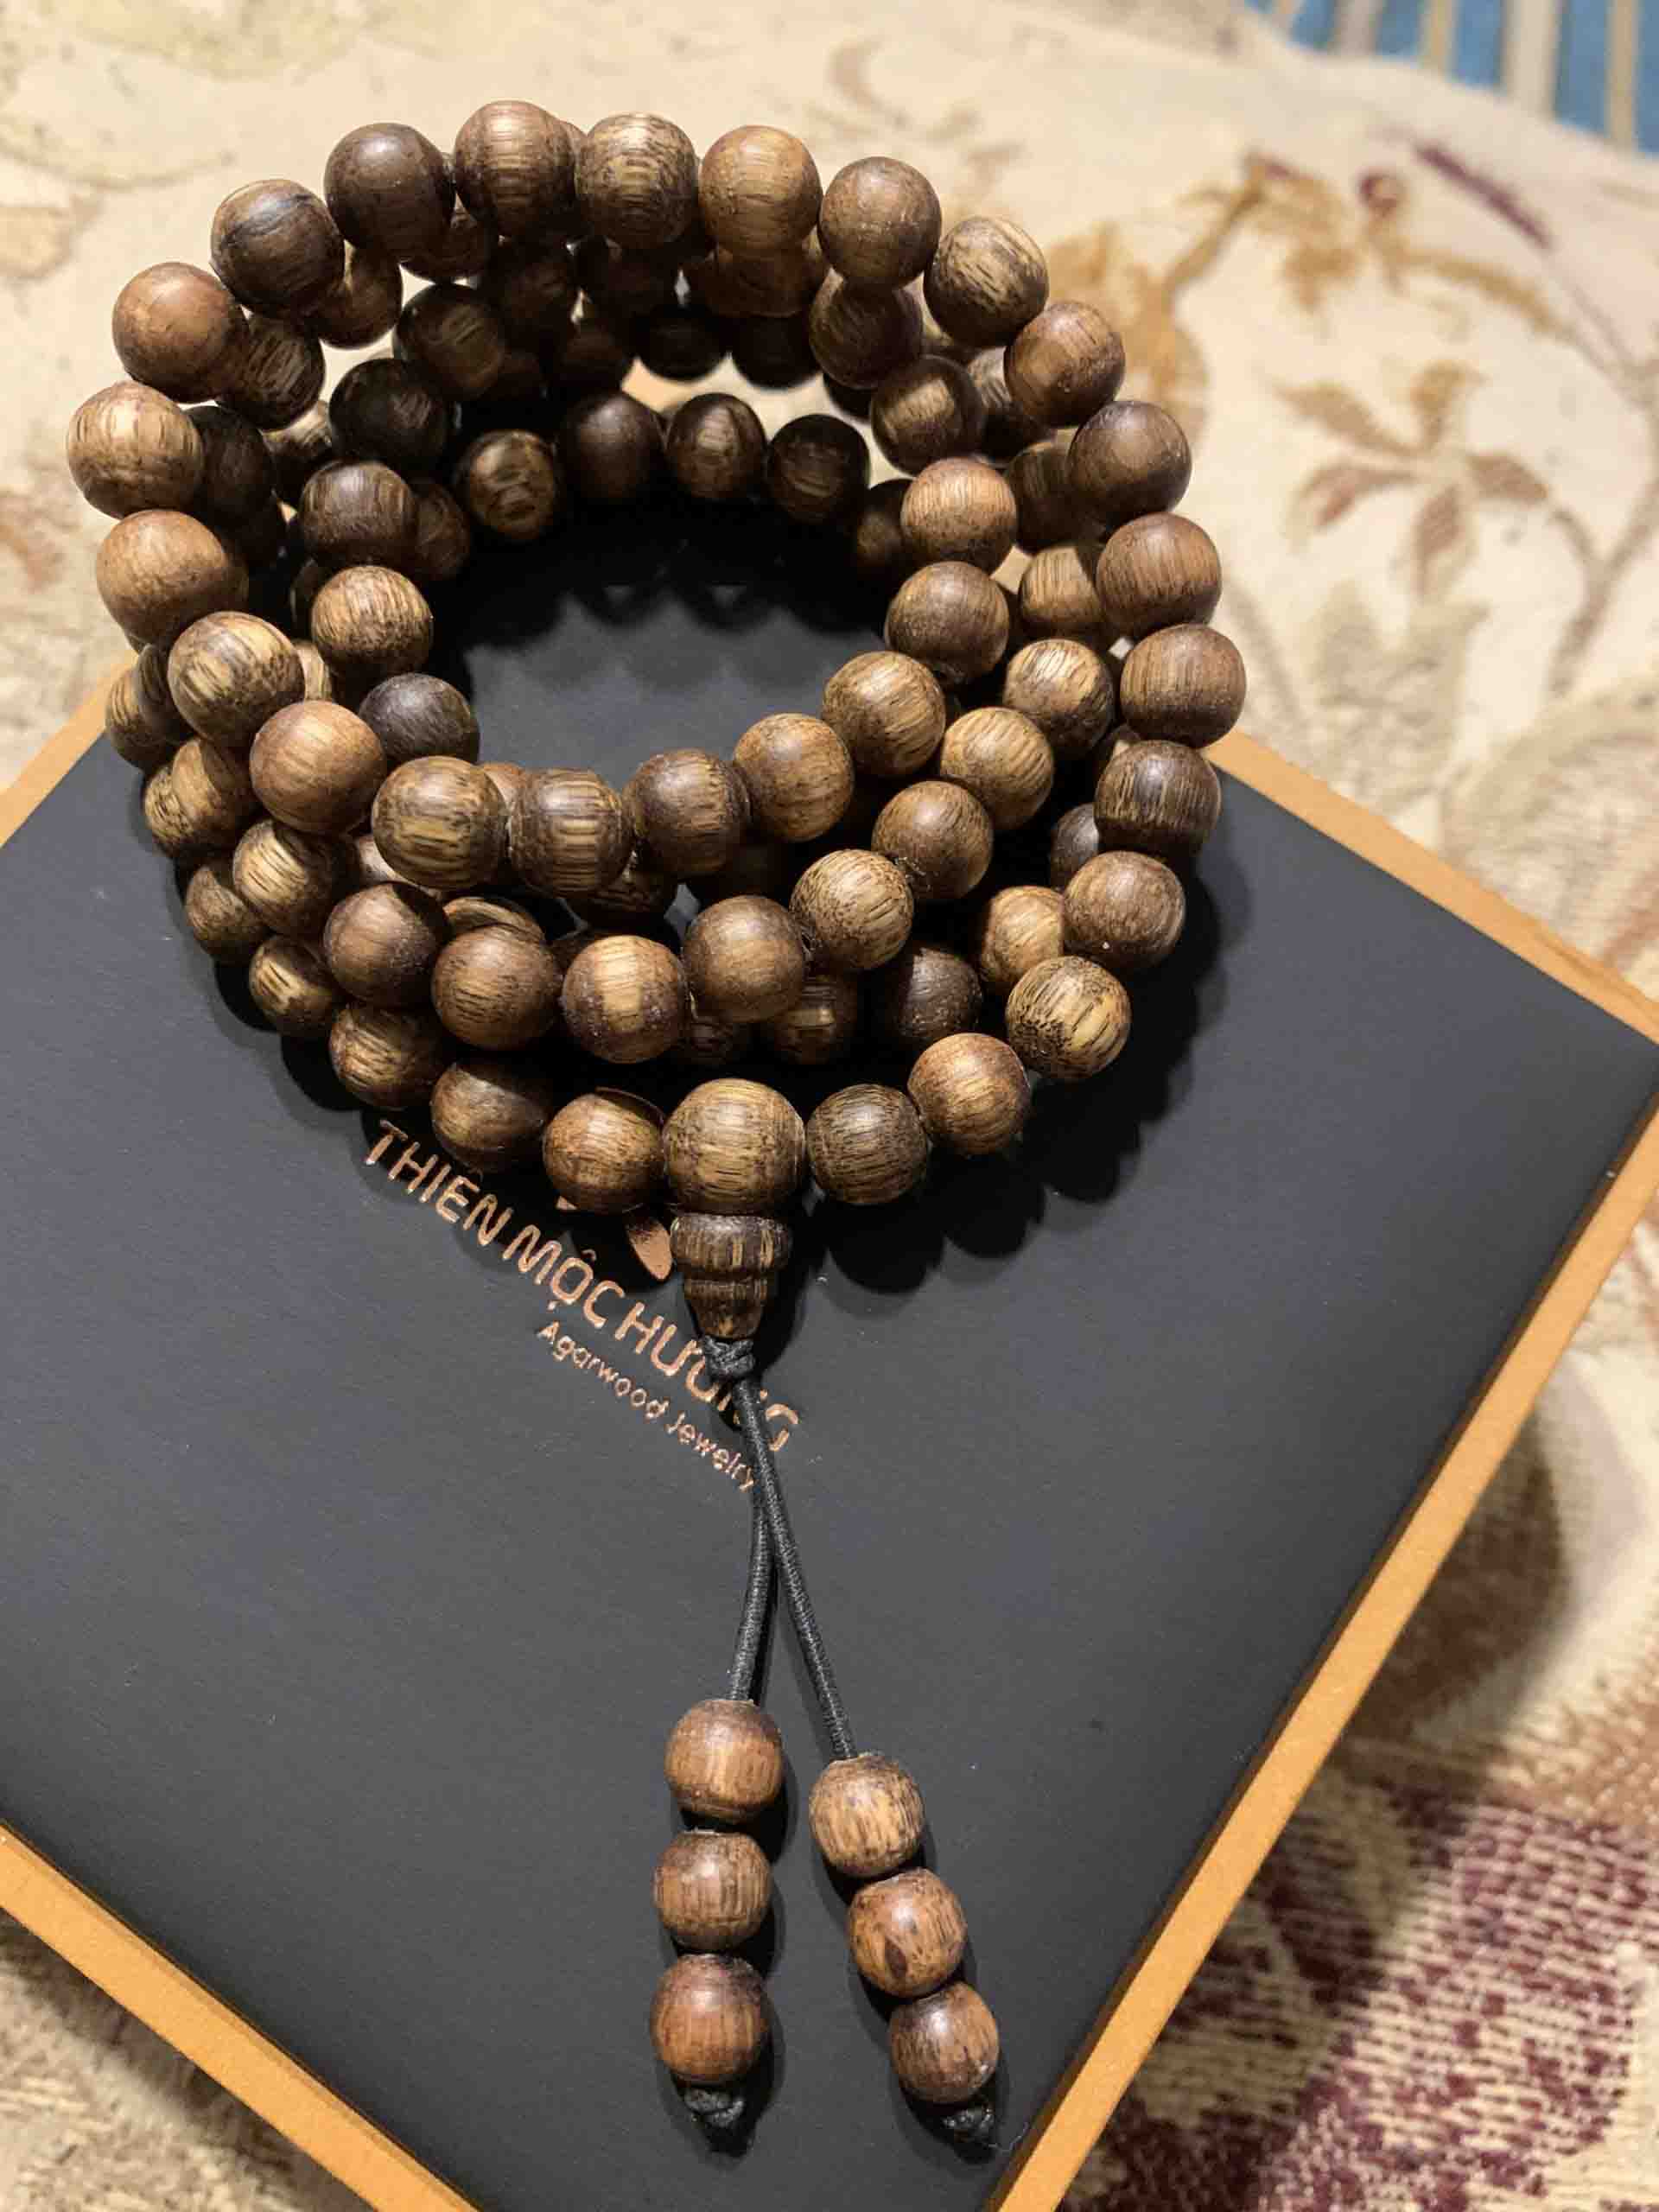 What is prayer beads? How many typical types?